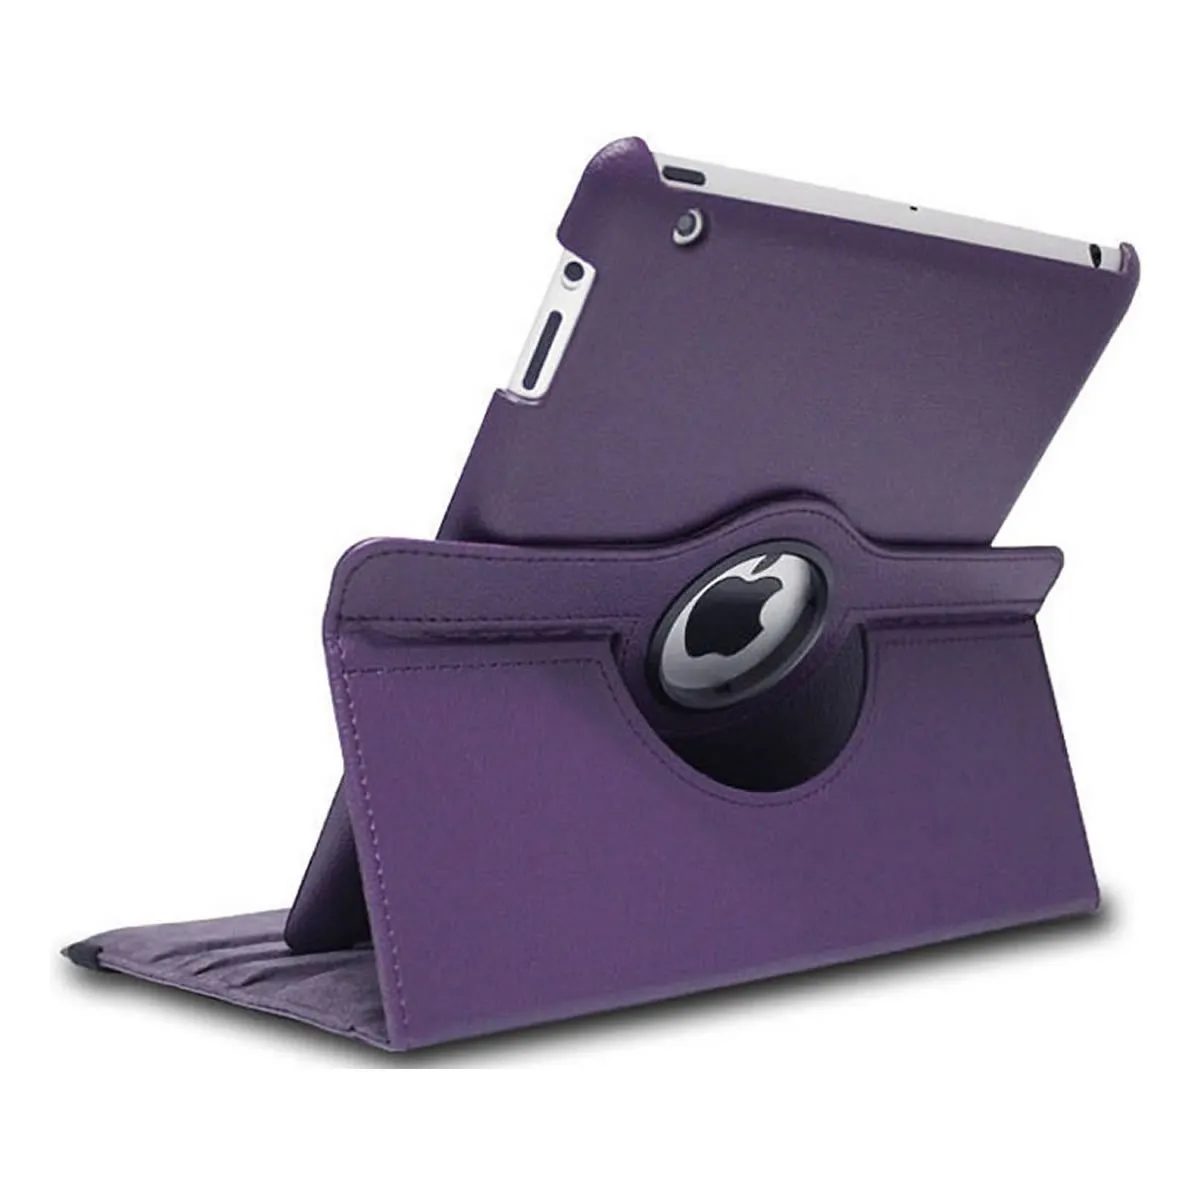 360 Degree Rotating Rotary PU Leather Case Smart Cover Case Stand for iPad Pro iPad mini 4 free DHL